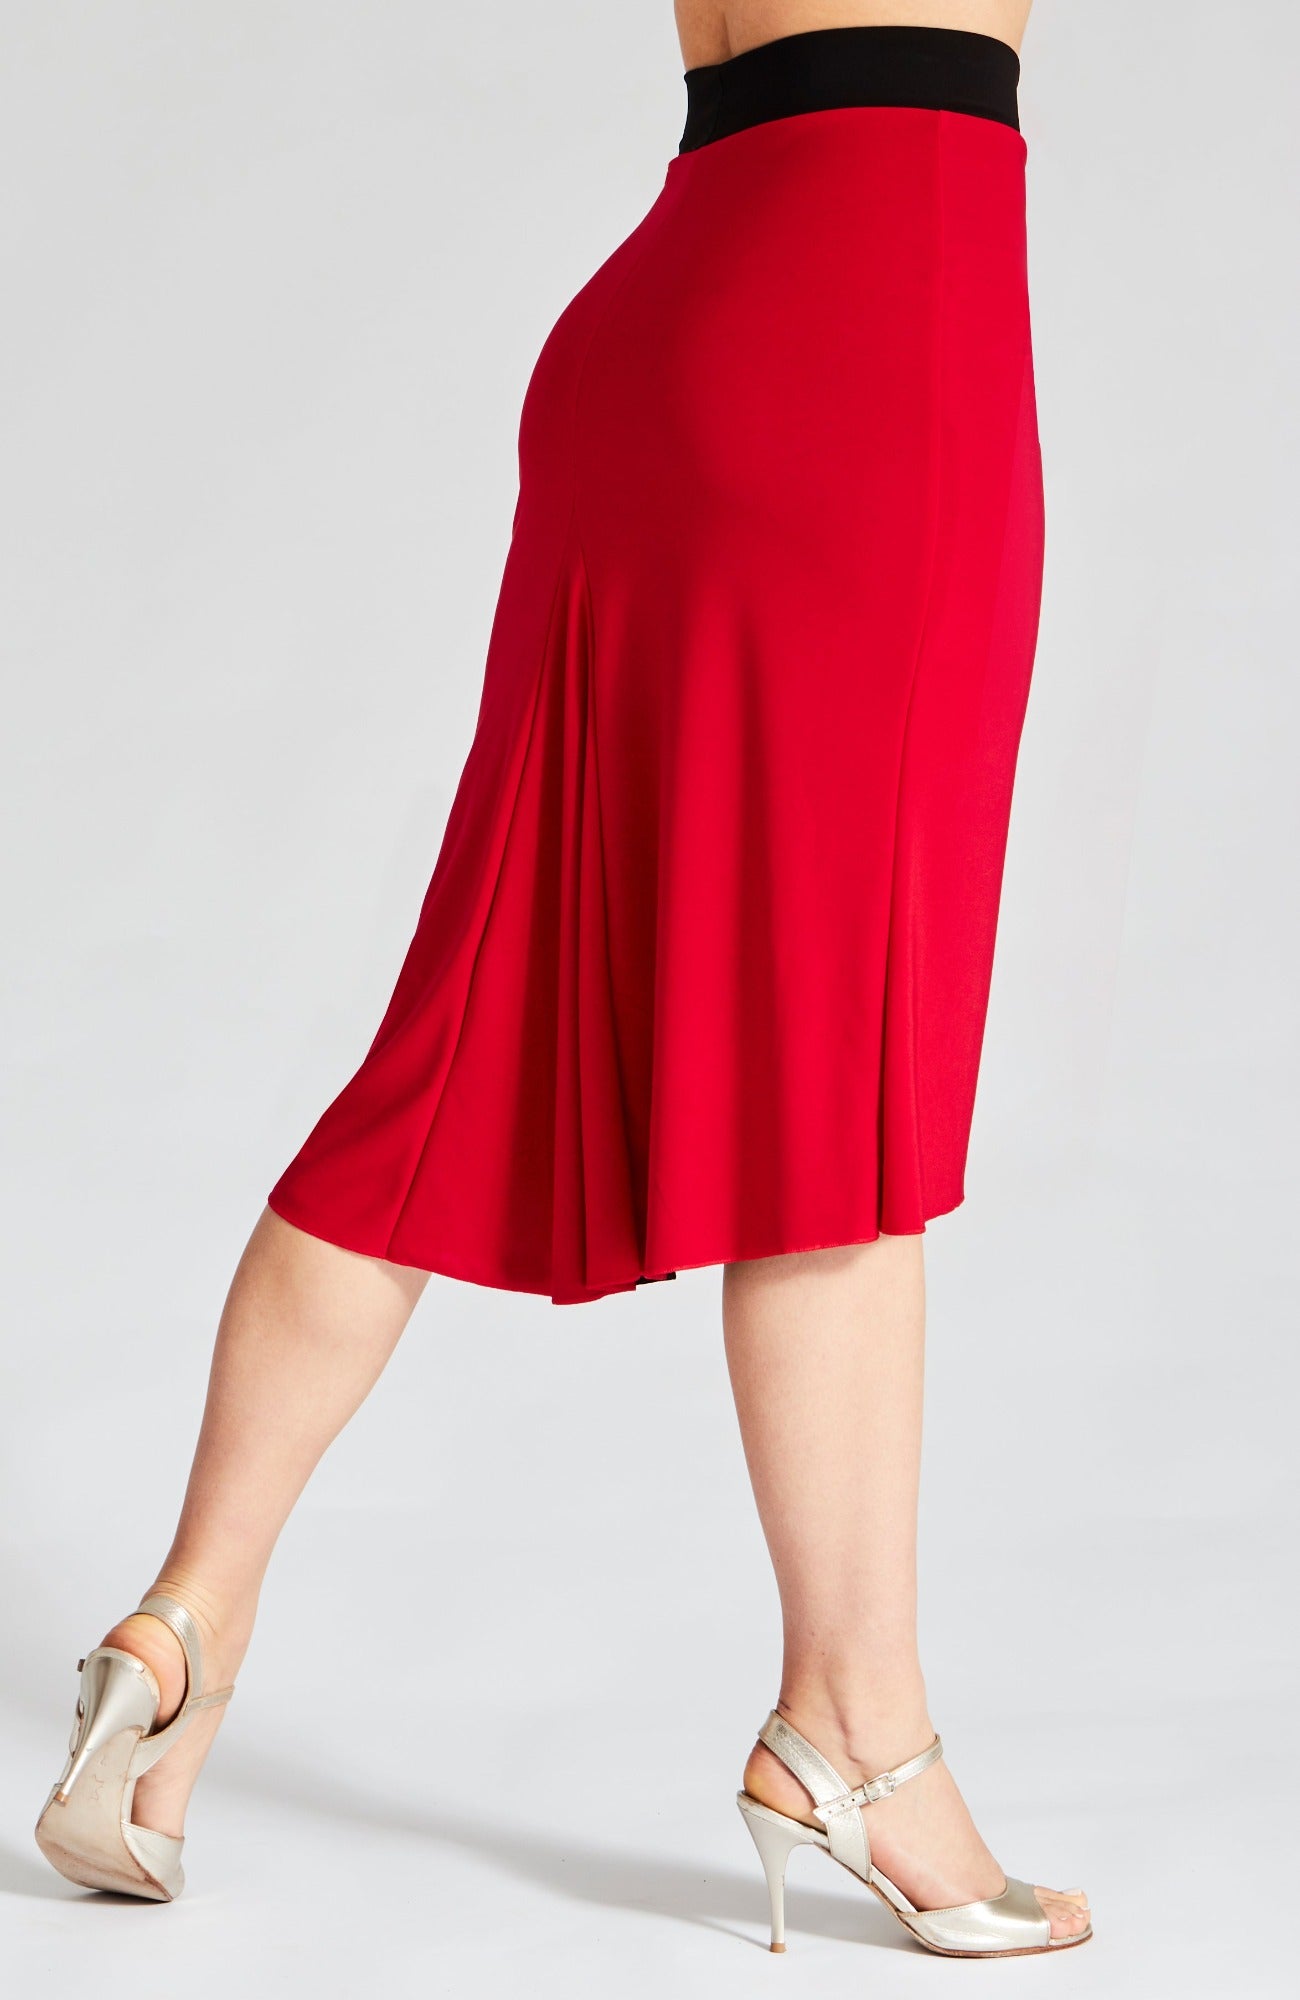 tango skirt reversible in red and black